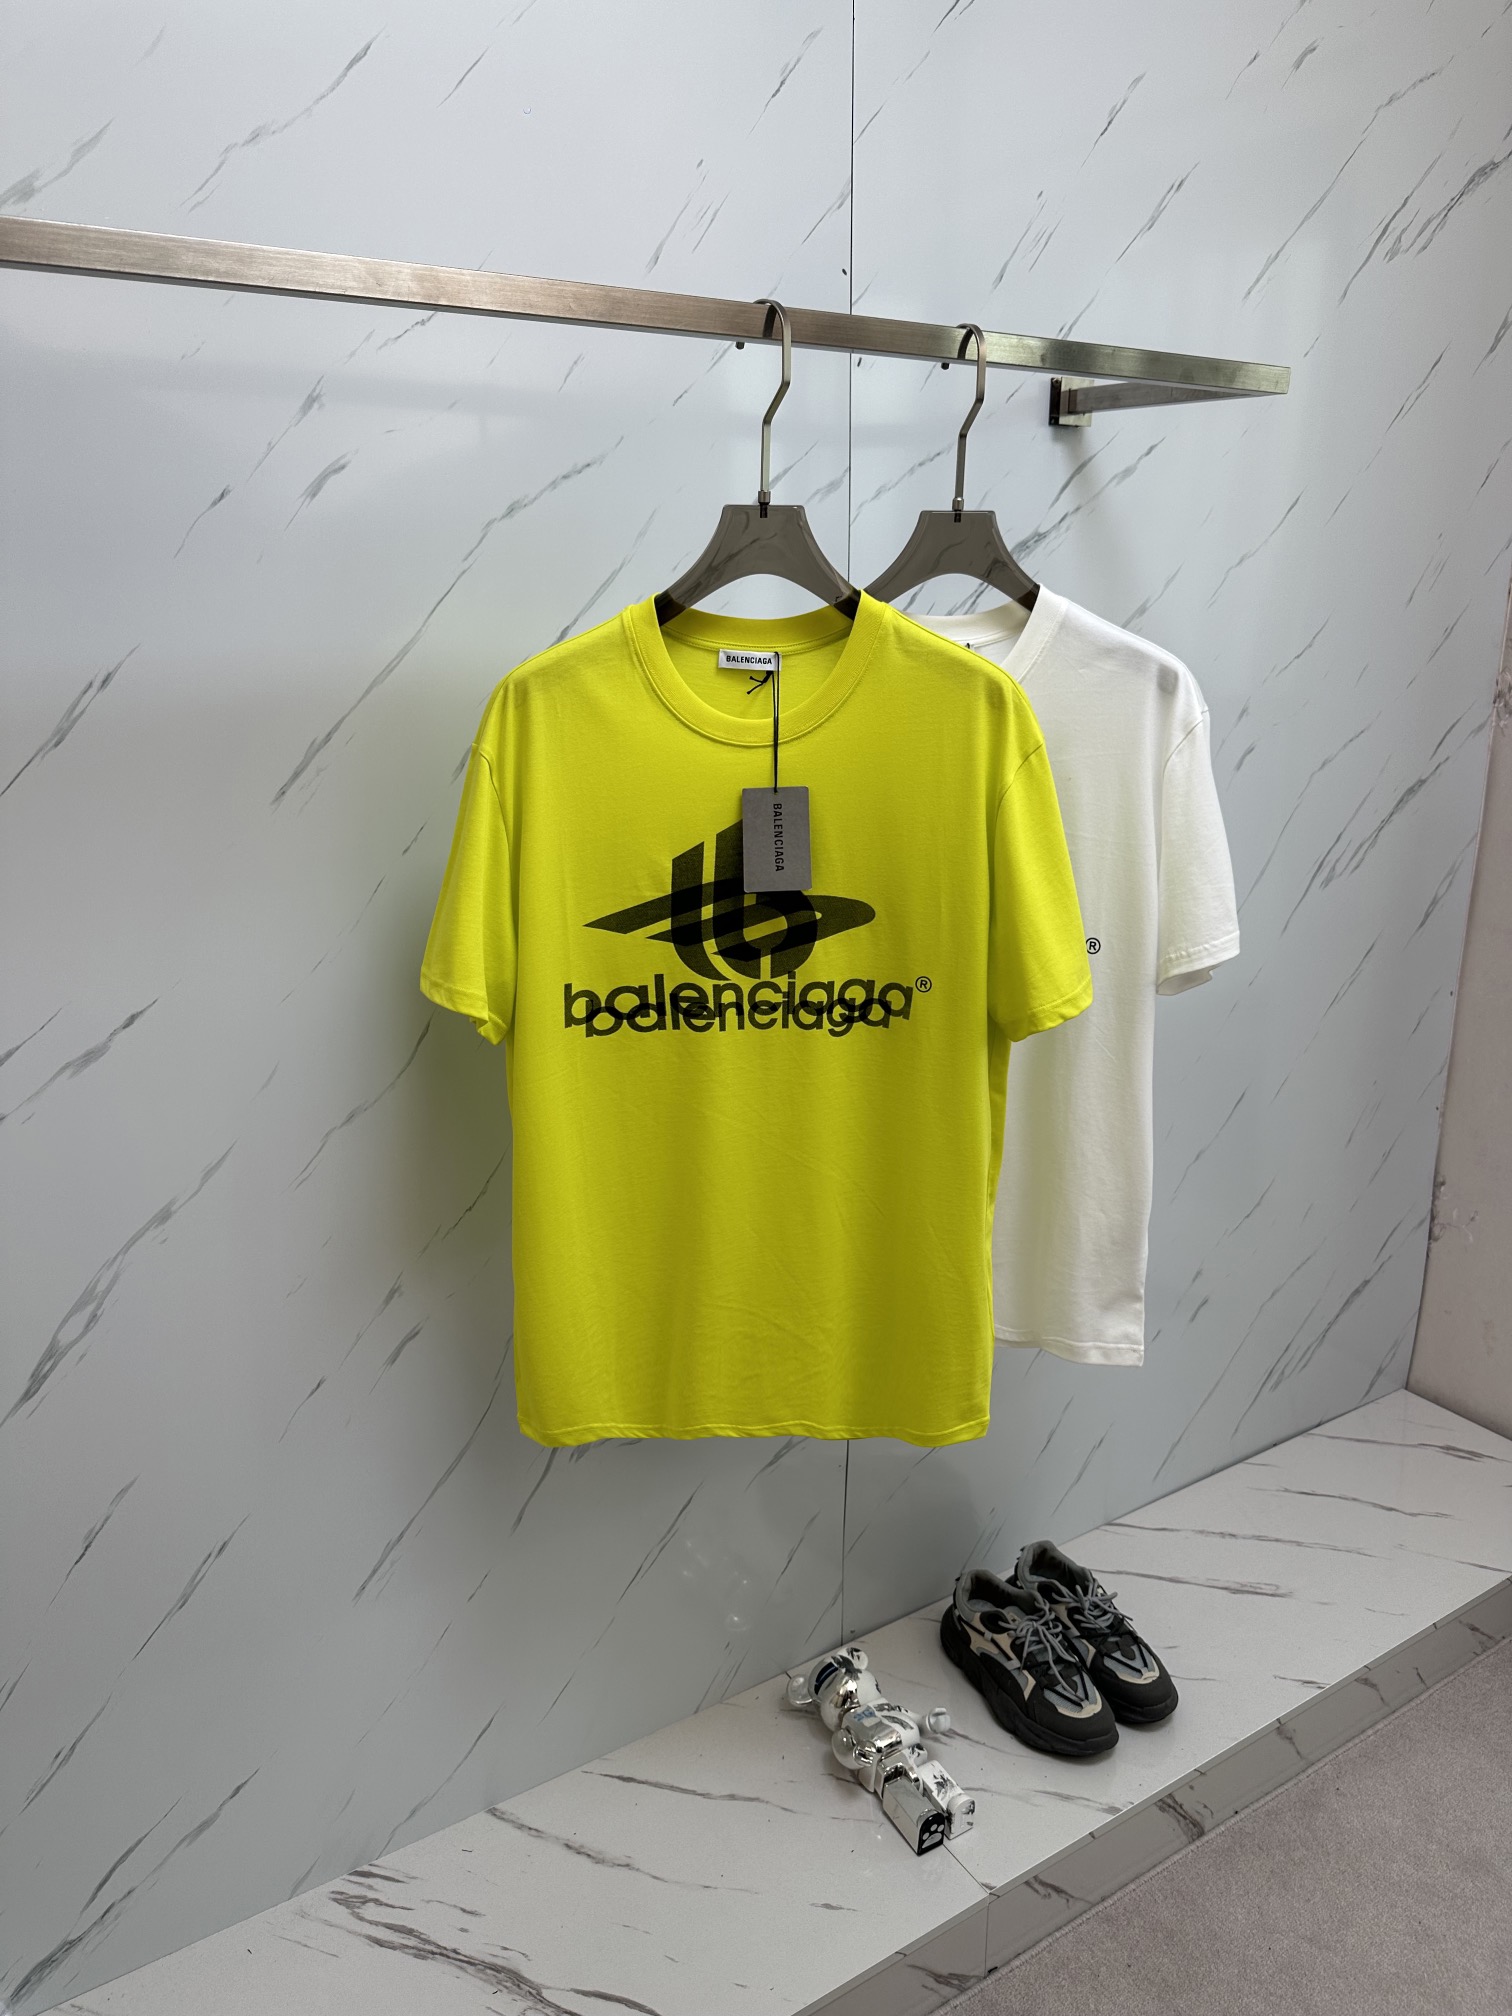 Balenciaga Clothing T-Shirt Buy Best High-Quality
 Cotton Spring/Summer Collection Fashion Short Sleeve